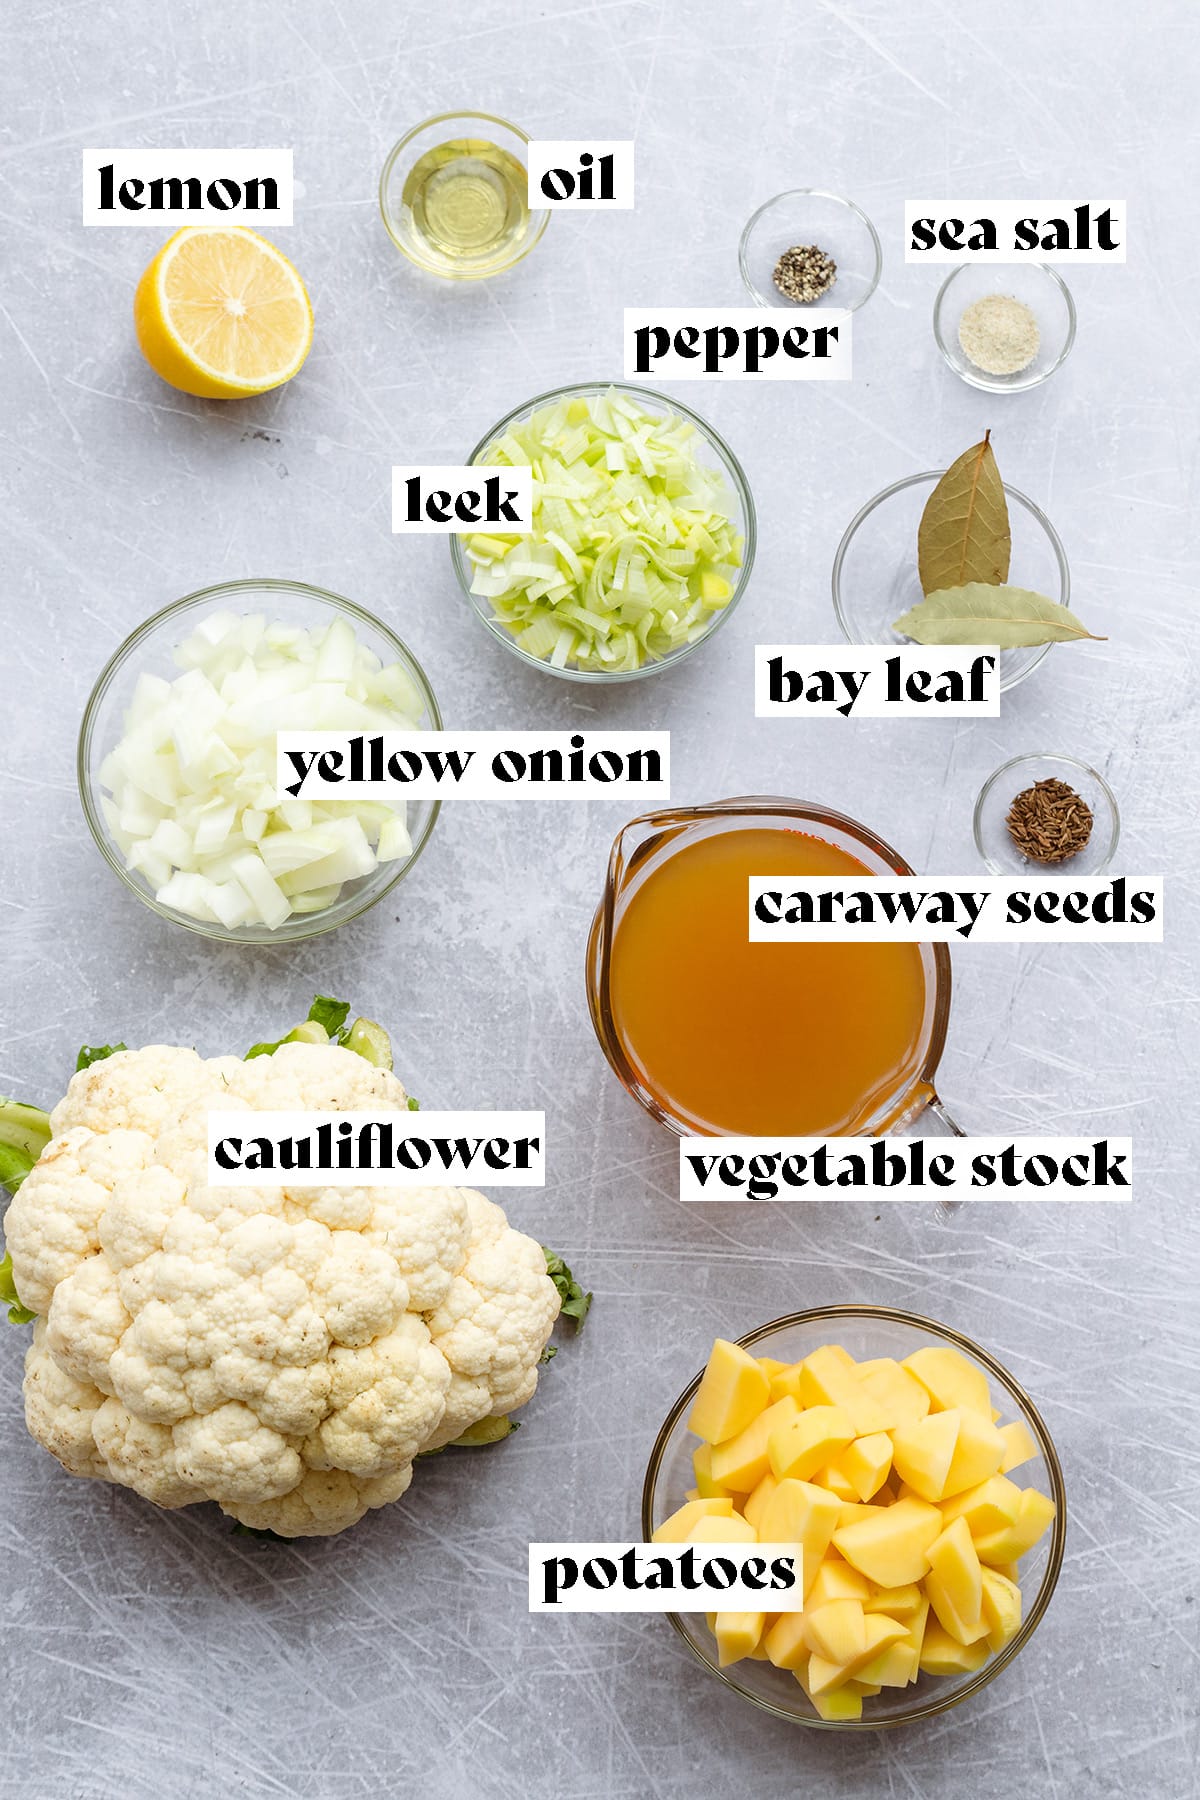 Ingredients for cauliflower soup all laid out on a scratched metal background.